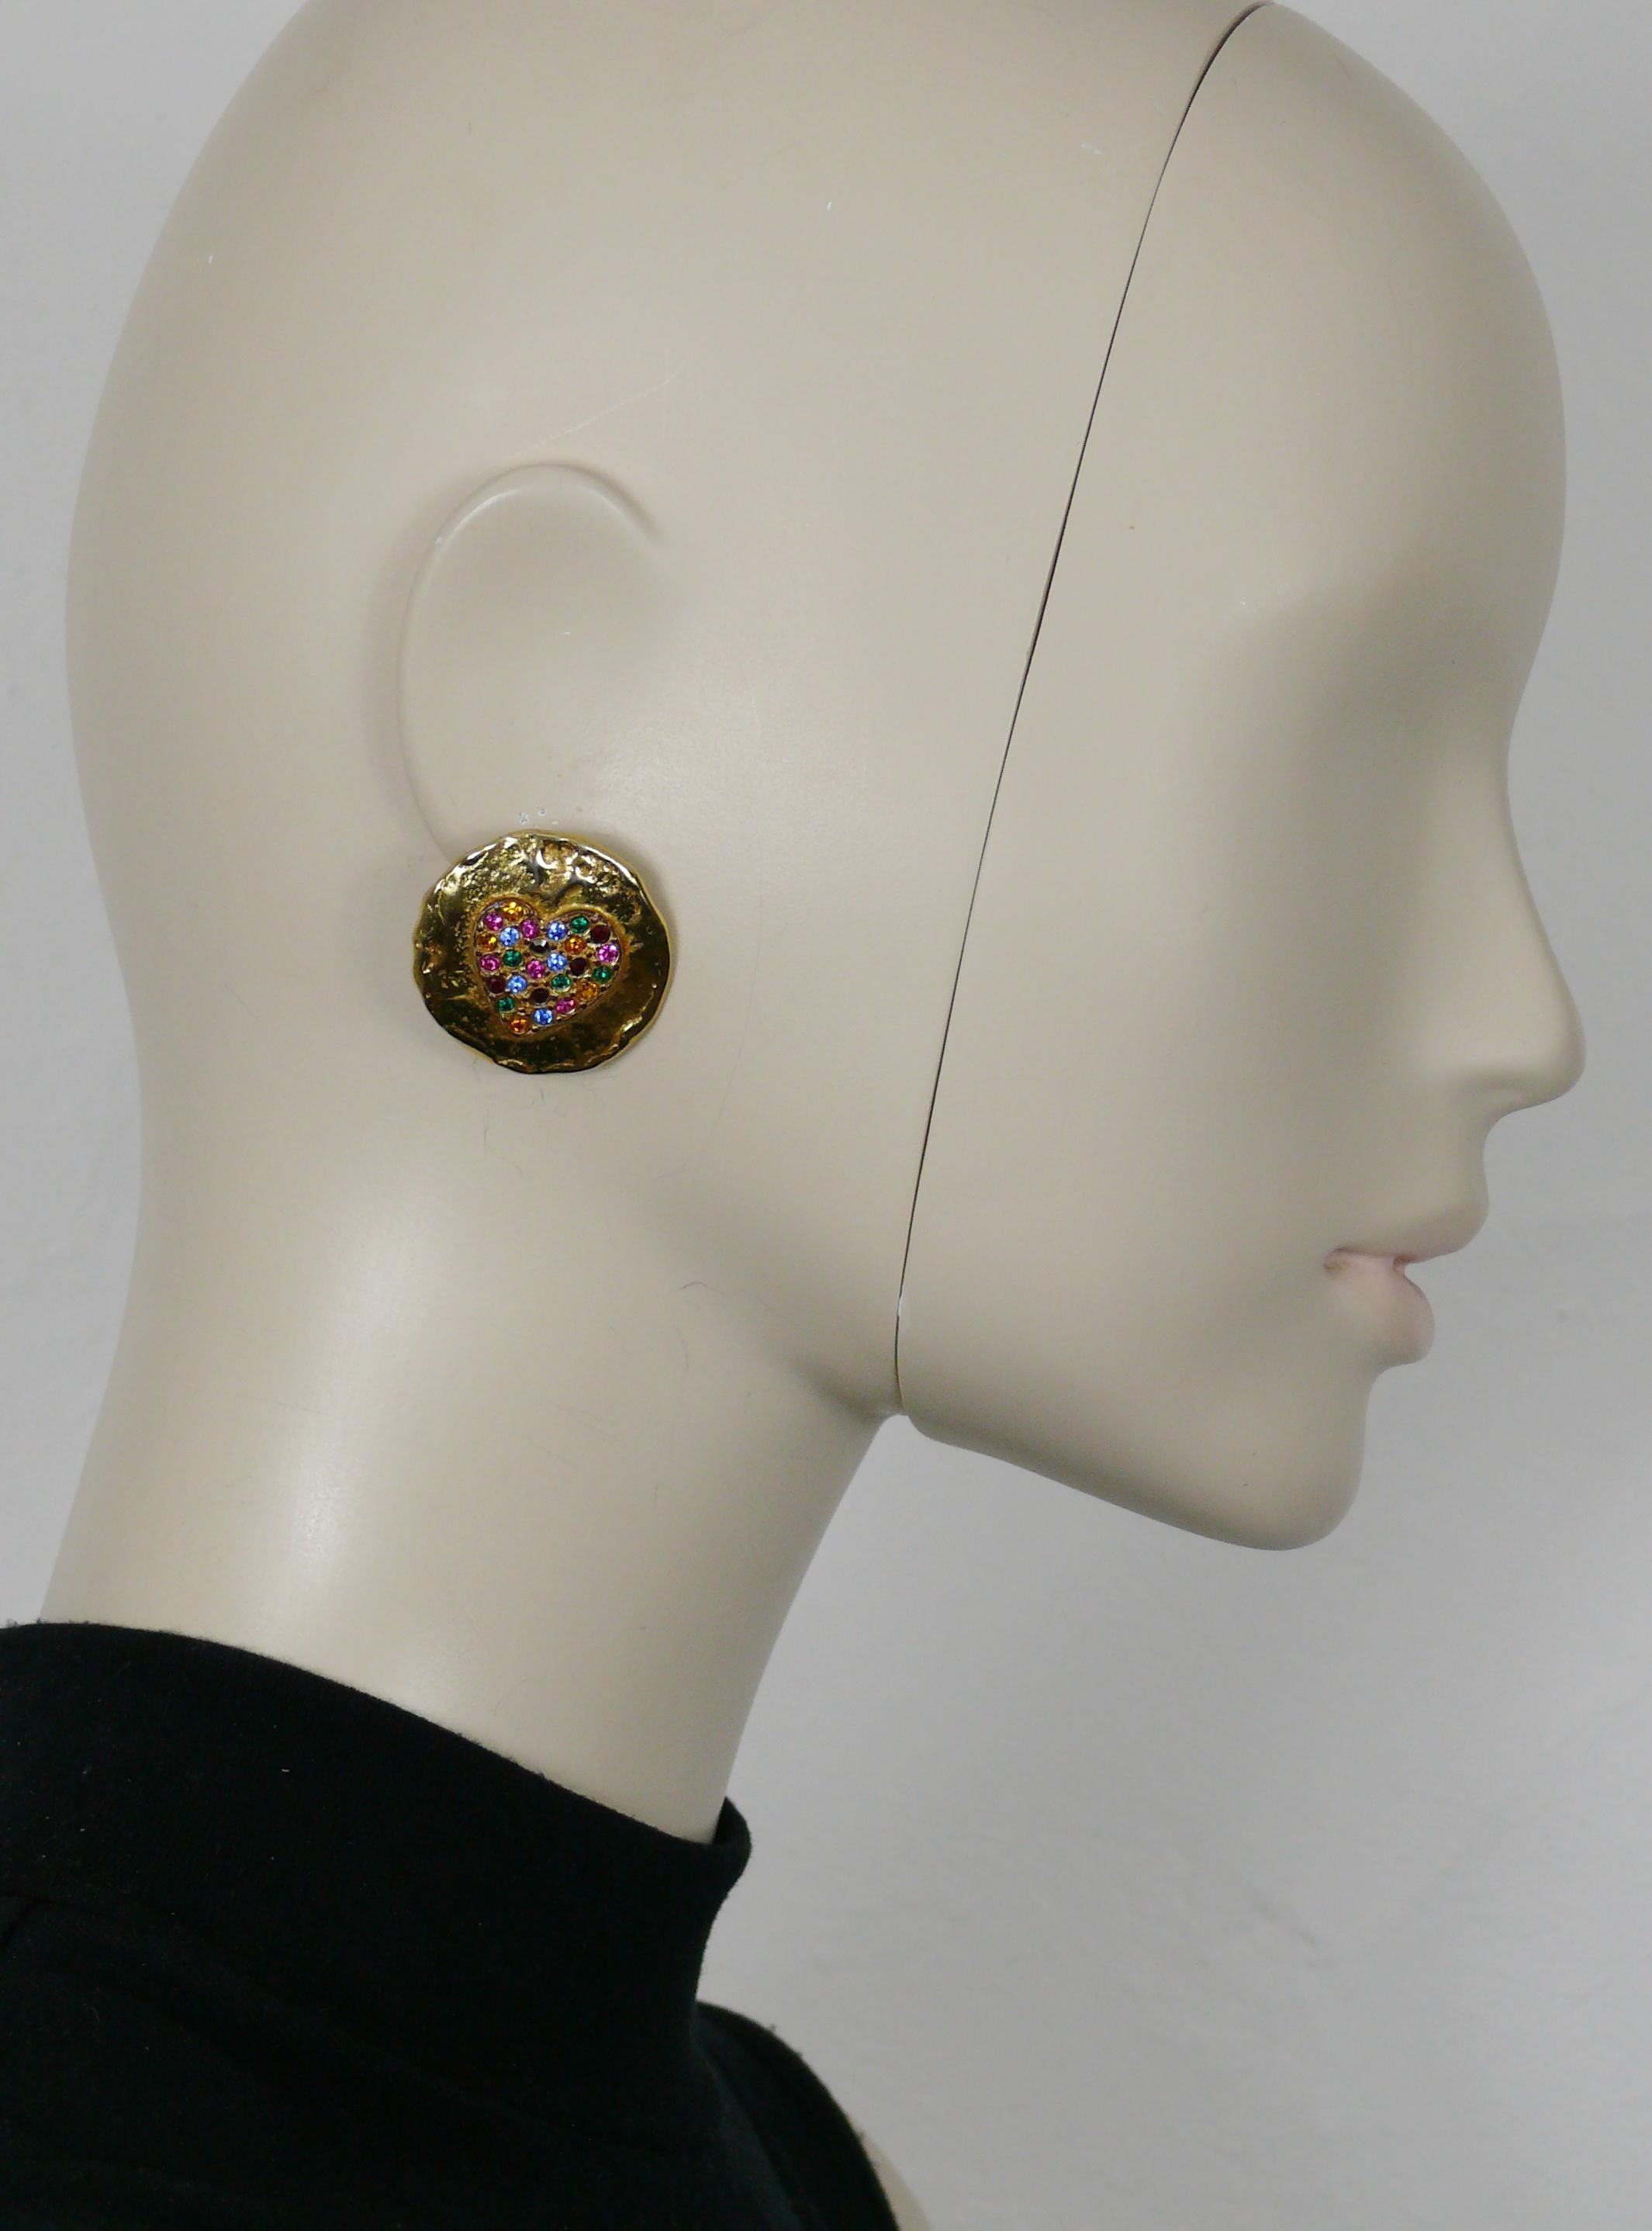 YVES SAINT LAURENT vintage textured gold tone clip-on earrings embellished with a multicoloured crystal heart at the center.

Embossed YSL Made in France.

Indicative measurements : height approx. 3 cm (1.18 inches) / width approx. 3 cm (1.18